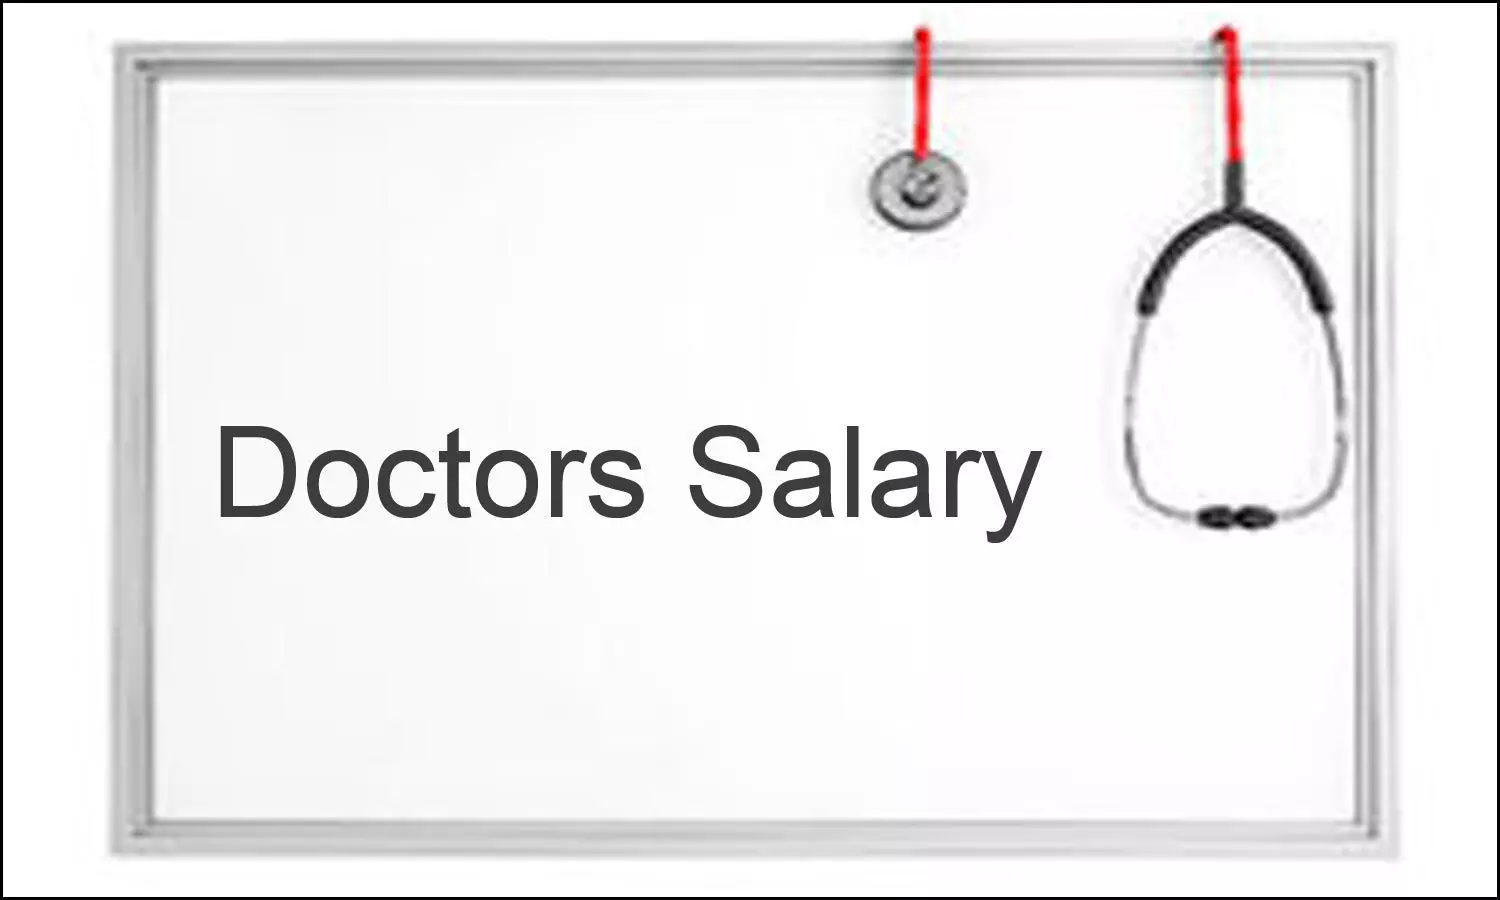 Payband-4 at 12 years of service demands Tamil Nadu Doctors association